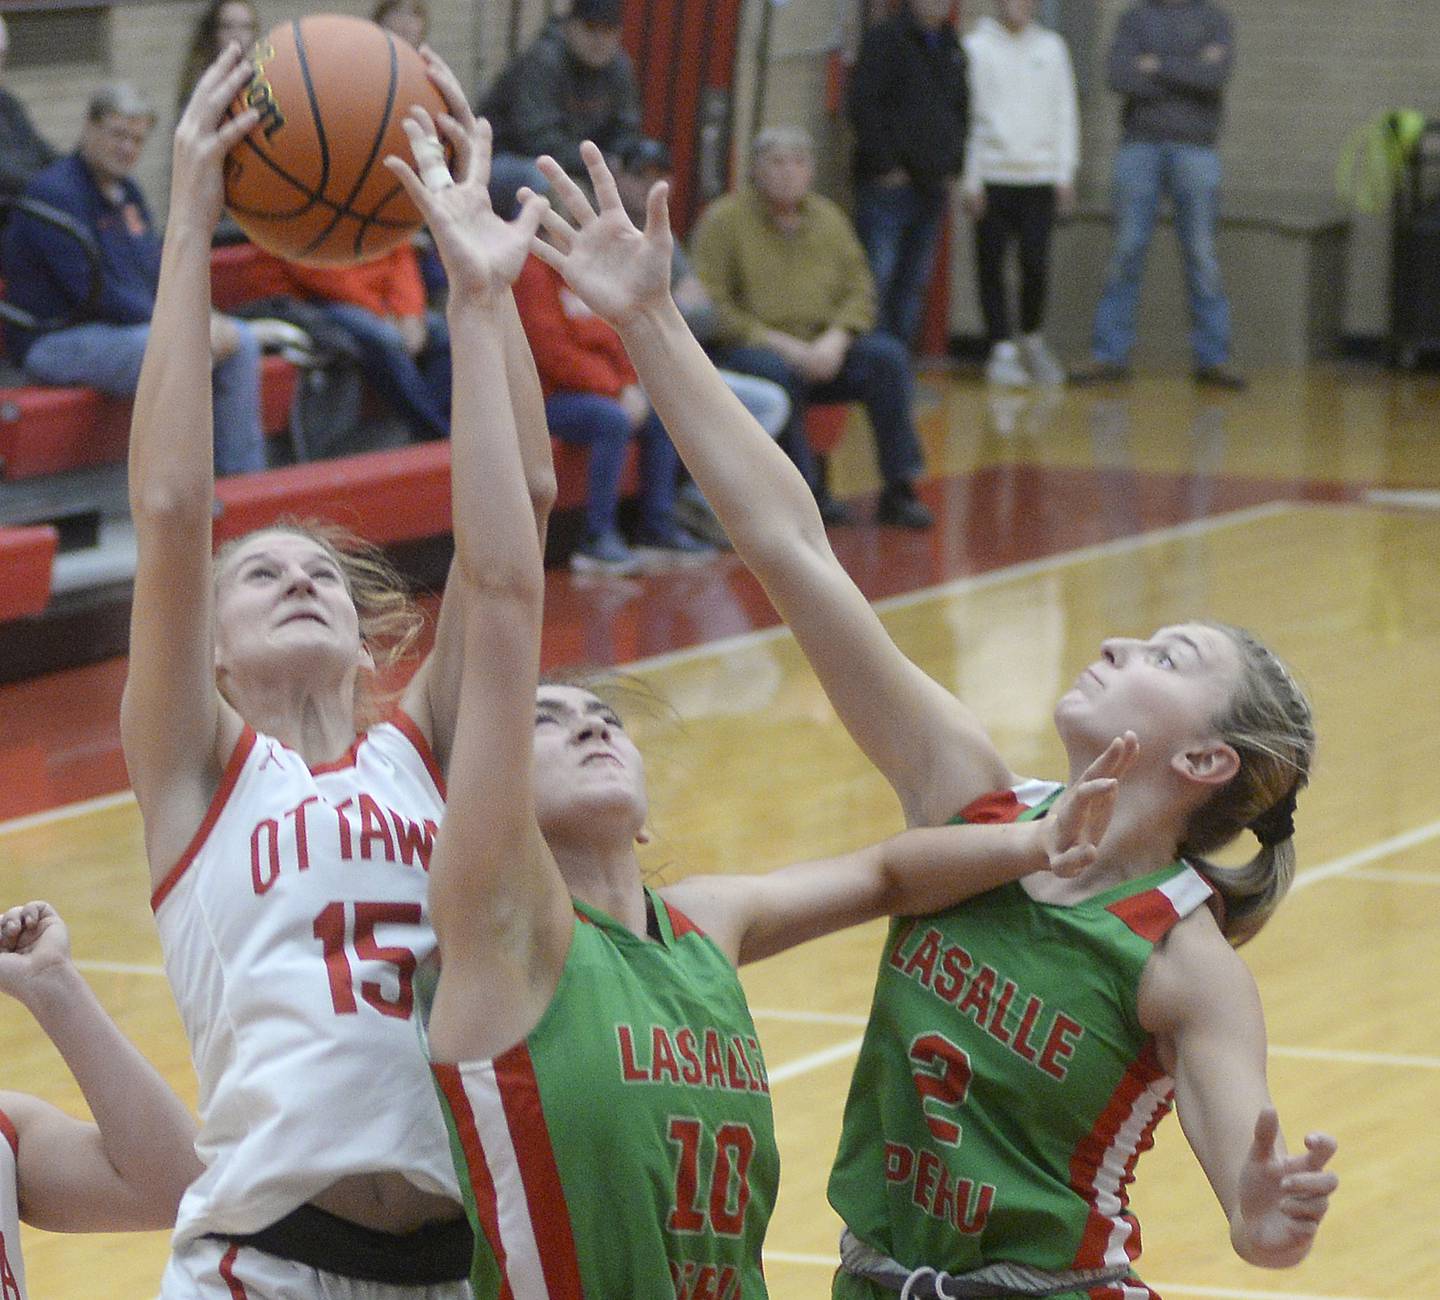 Ottawa’s Hailey Larsen pulls down this rebound ahead of LaSalle Peru’s Bailey Pode and Taylor Martyn in the 1st period on Wednesday Dec. 7, 2022 at Kingman Gymnasium in Ottawa.